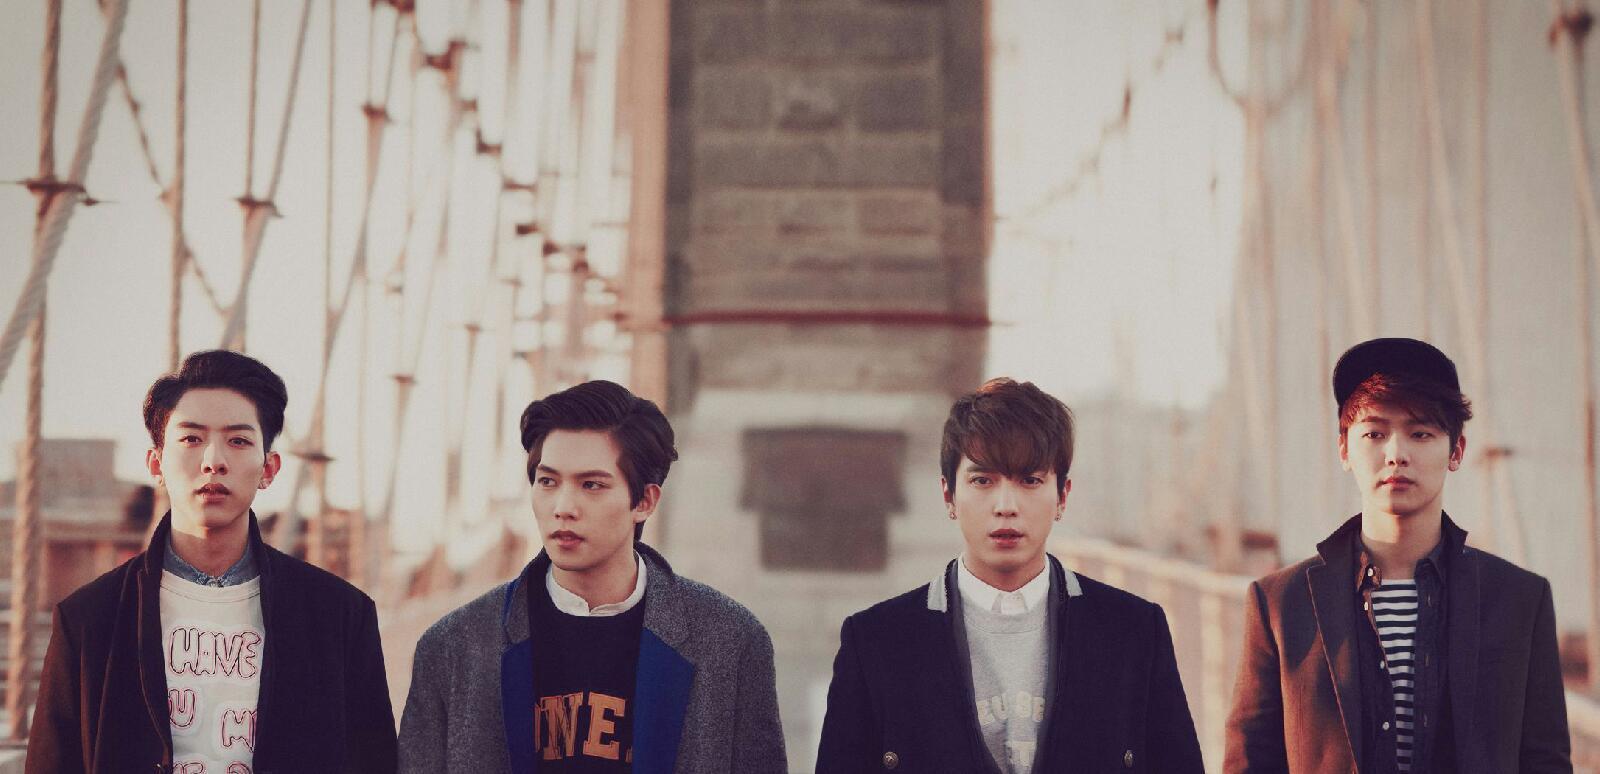 140213 [Photo/Info] CNBLUE: Can't Stop Photo and wallpaper ...